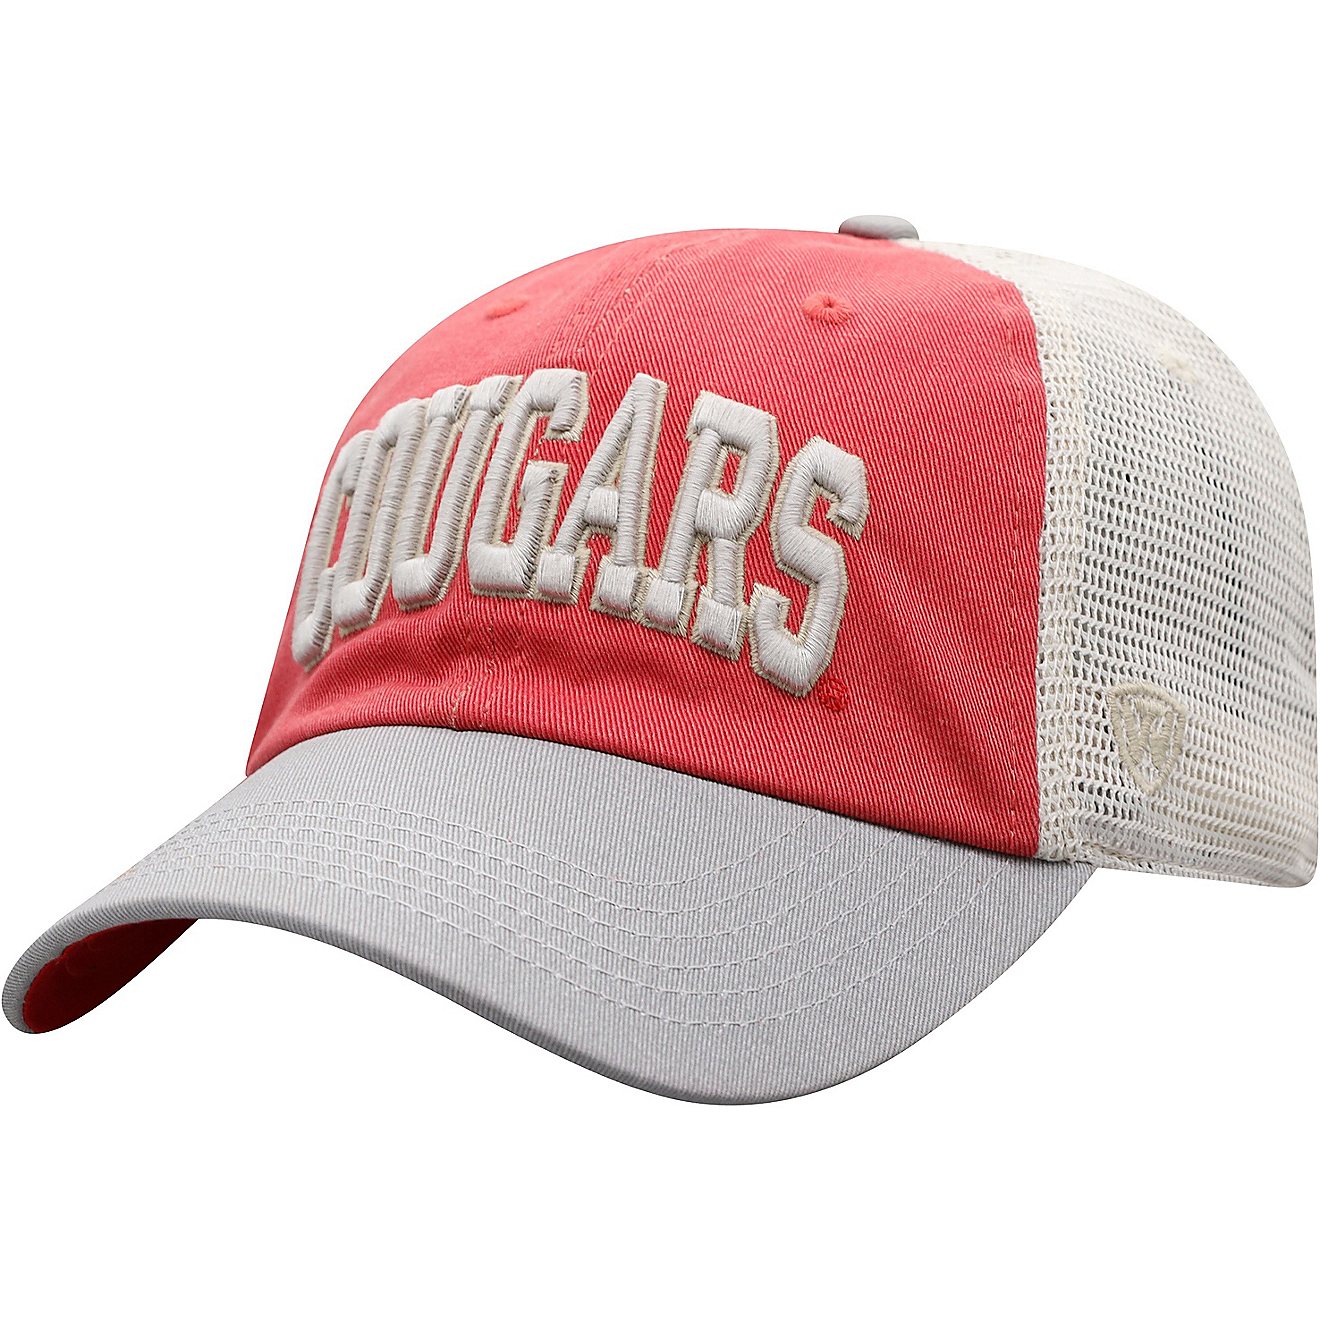 Top of the World Men's University of Houston Andy 3-Tone Cap                                                                     - view number 3